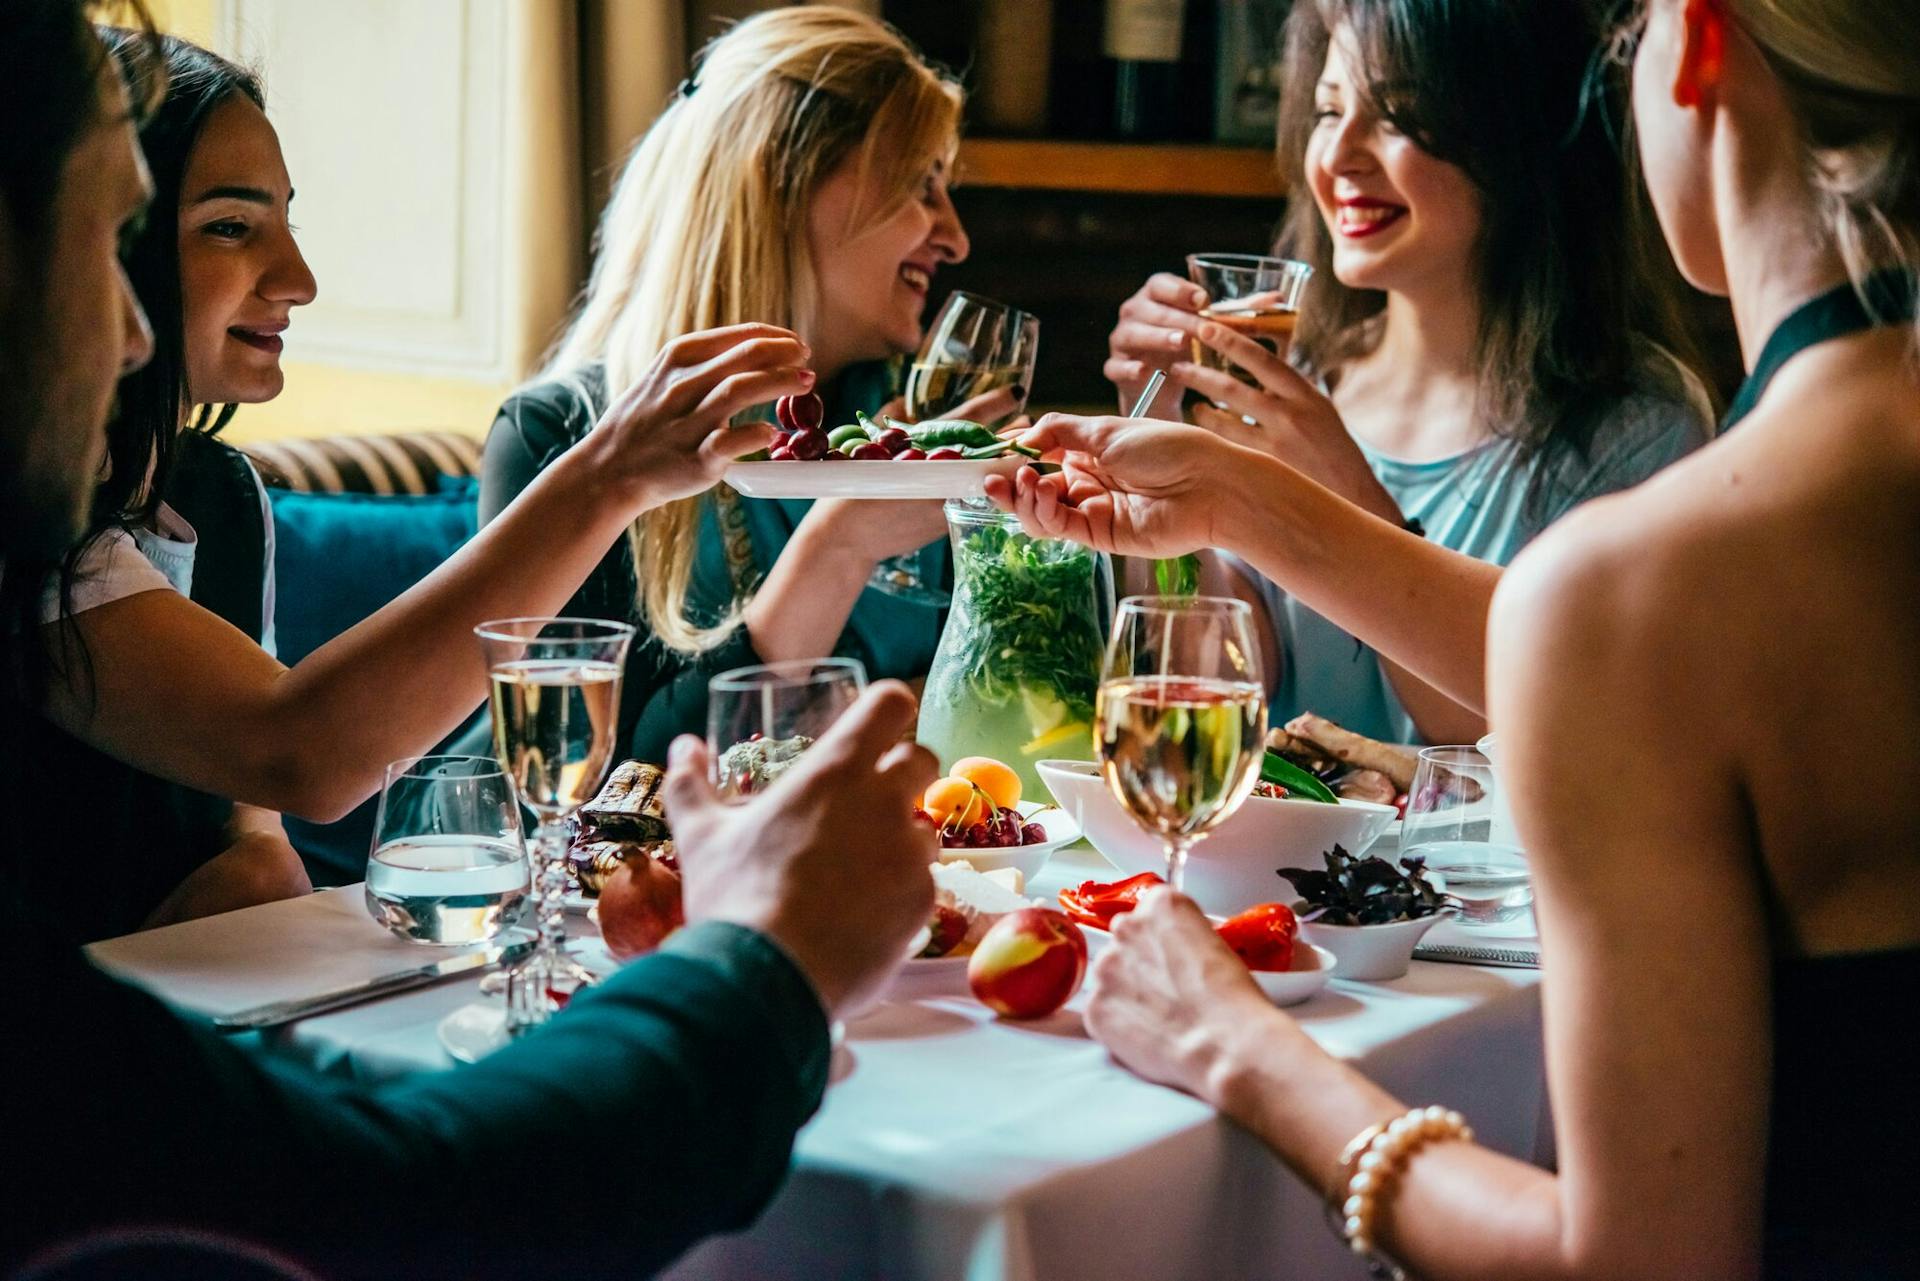 Over Half of Americans Turn to Friends & Family to Find New Restaurants